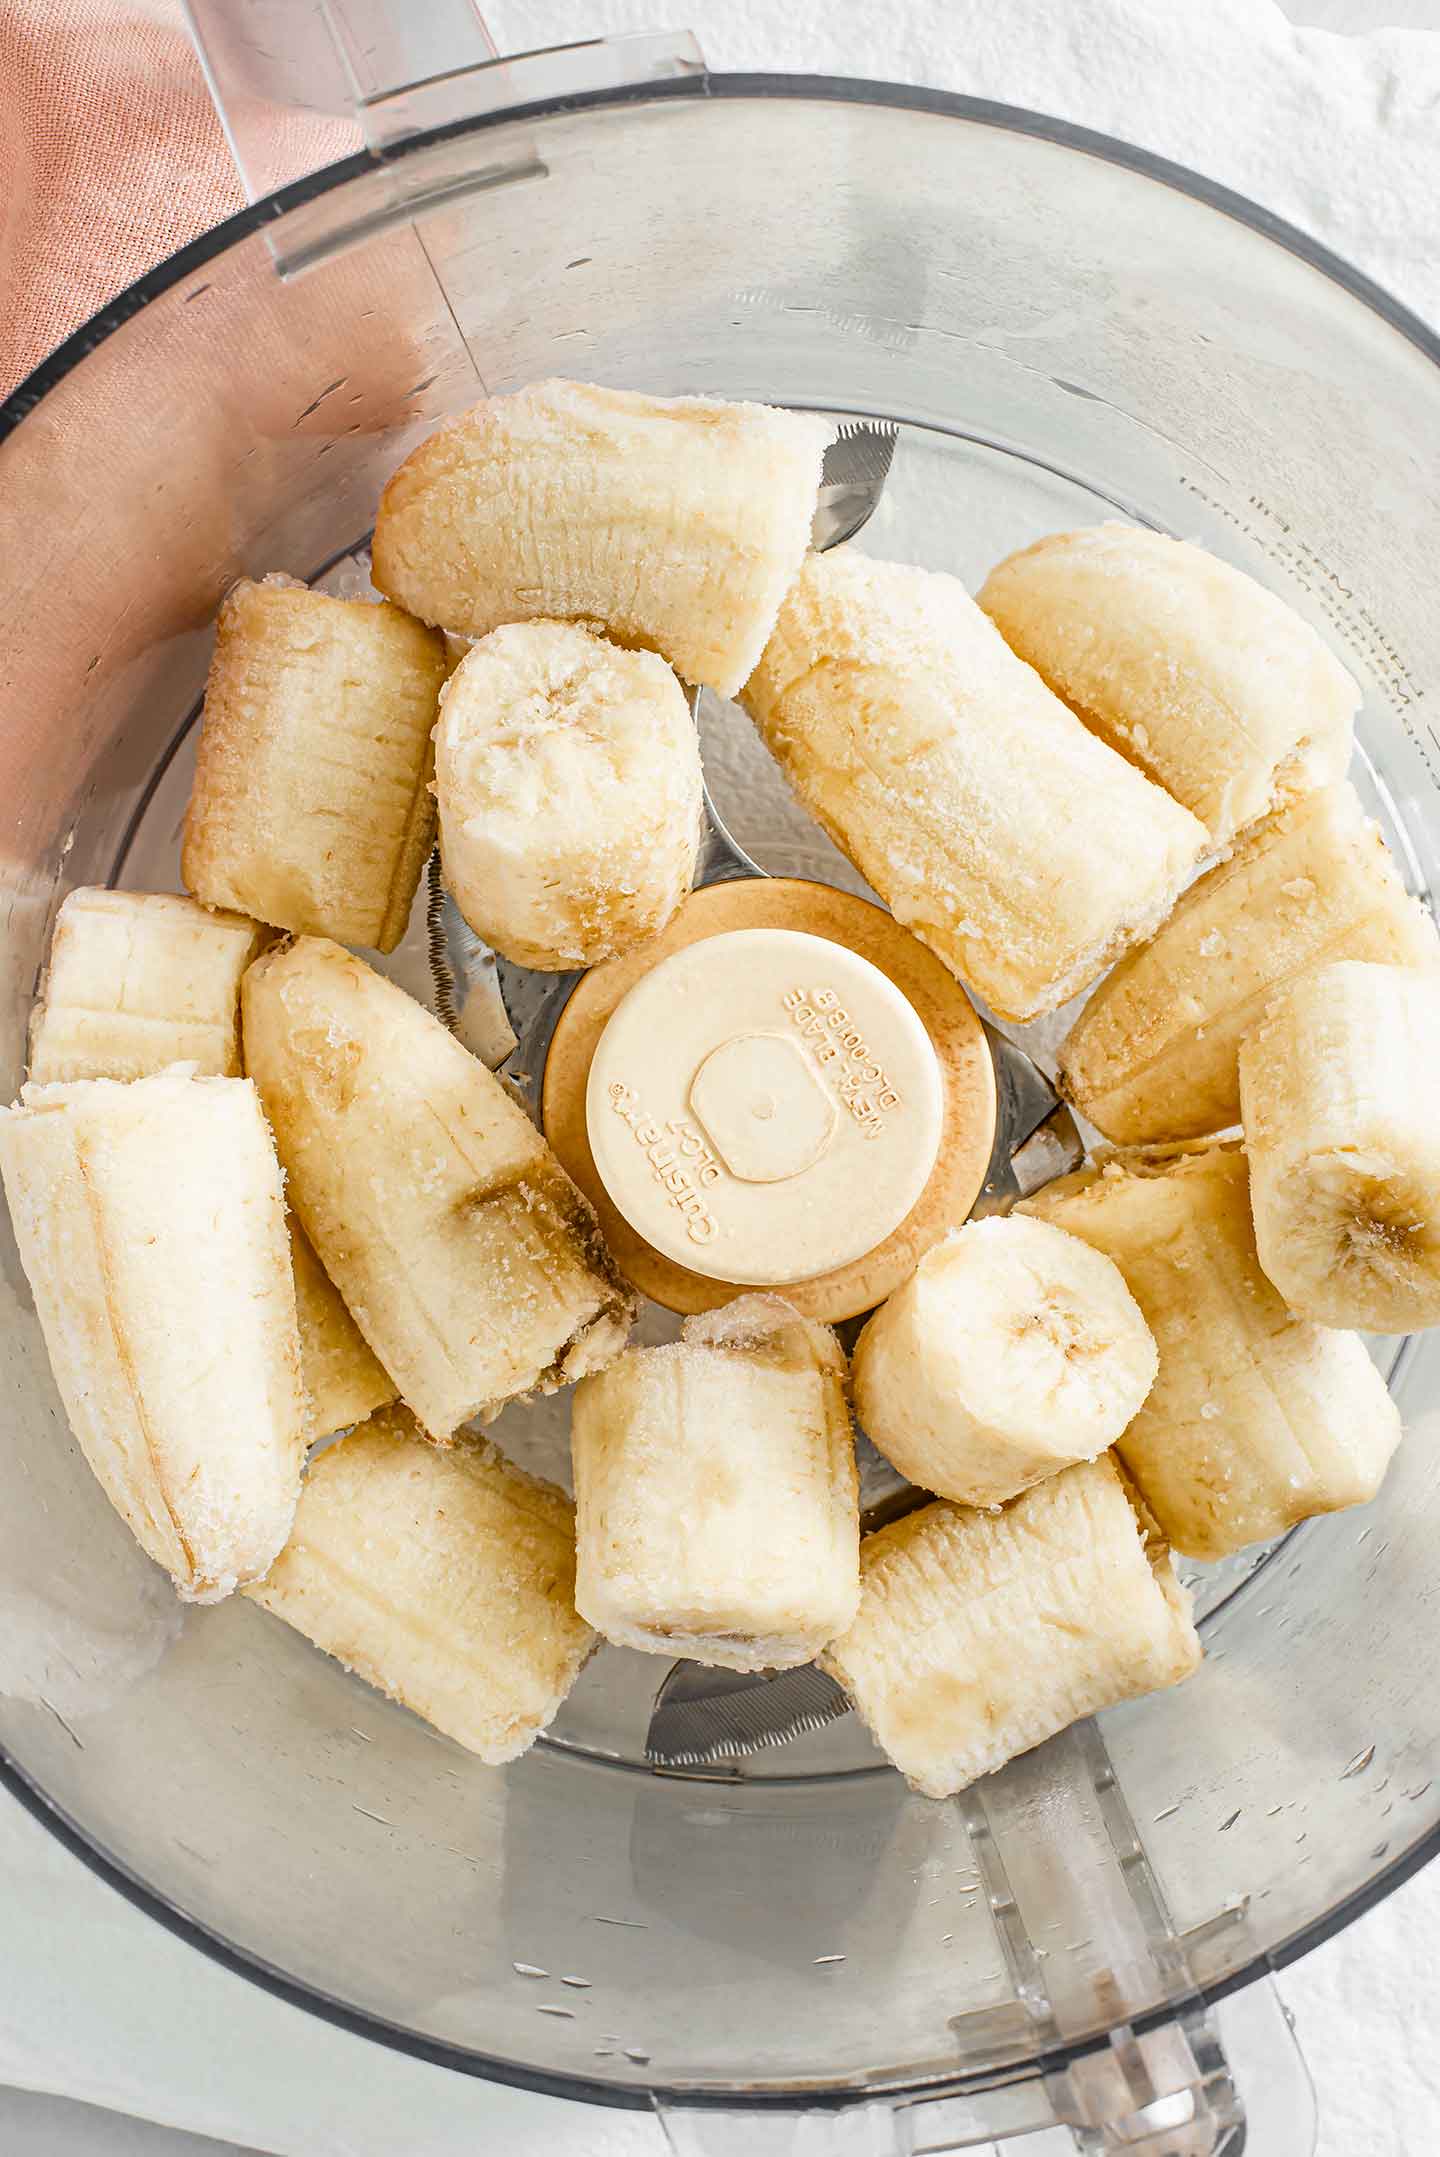 Top down view of frozen banana chunks in a food processor.